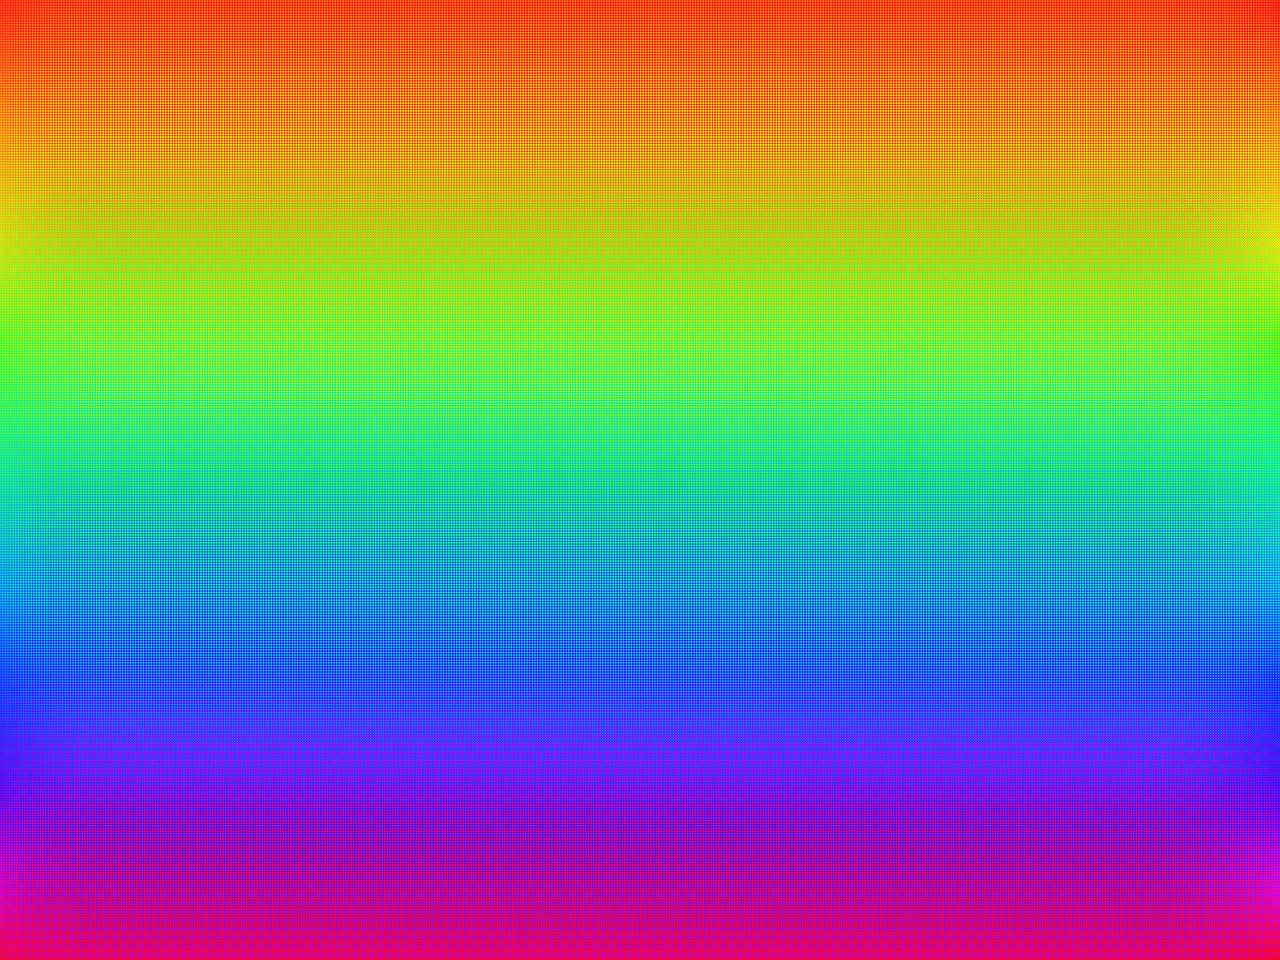 a rainbow colored background with horizontal lines